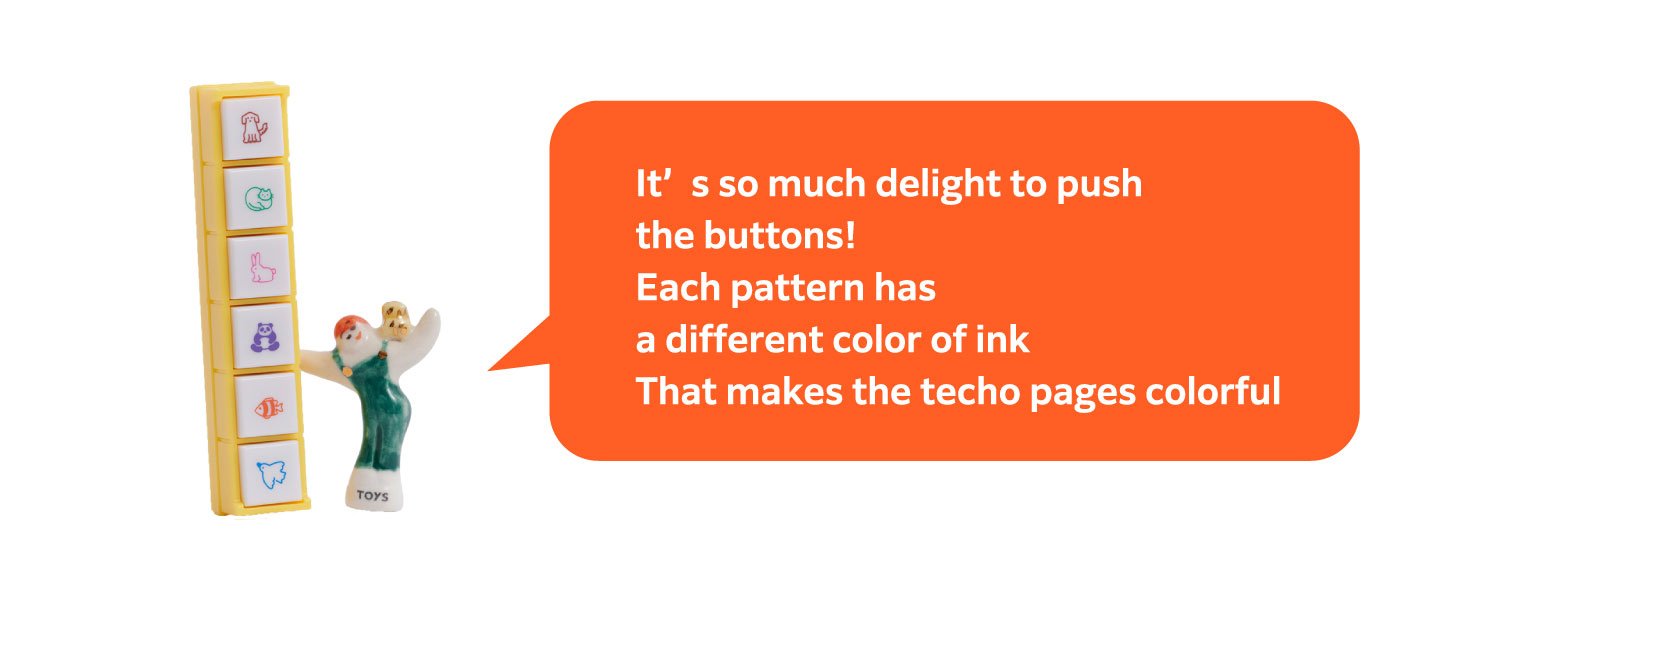 It’s so much delight to push the buttons!
                  Each pattern has a different color of ink
                  That makes the techo pages colorful